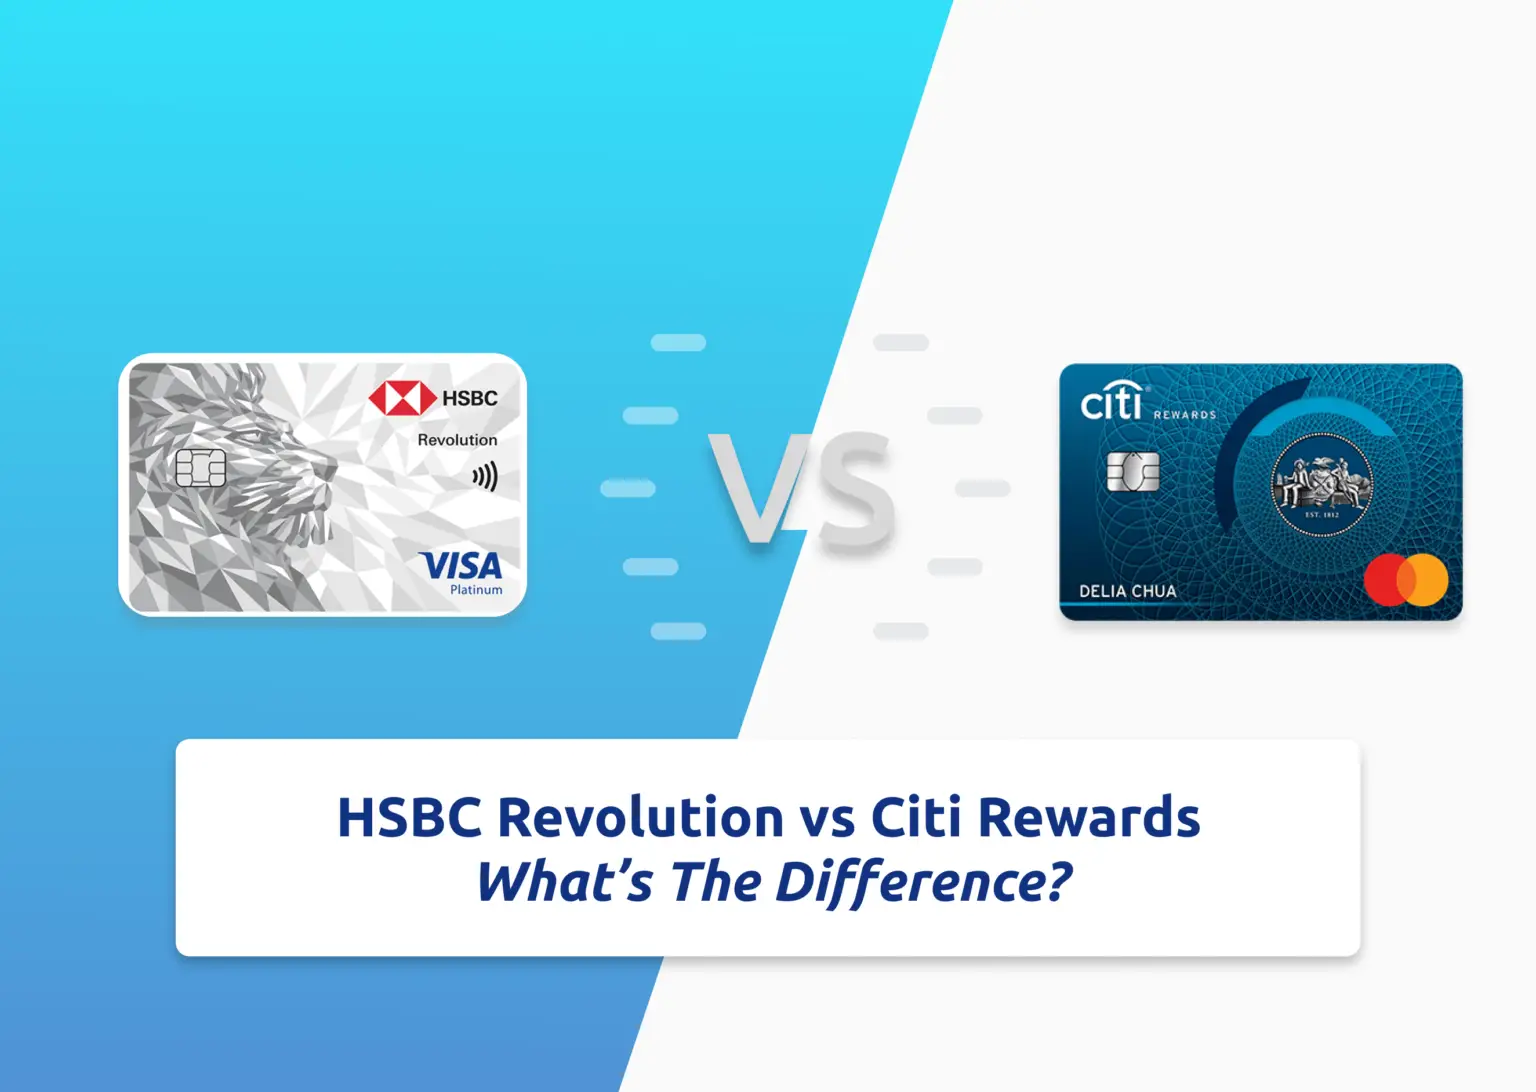 hsbc-revolution-vs-citi-rewards-what-s-the-difference-financially